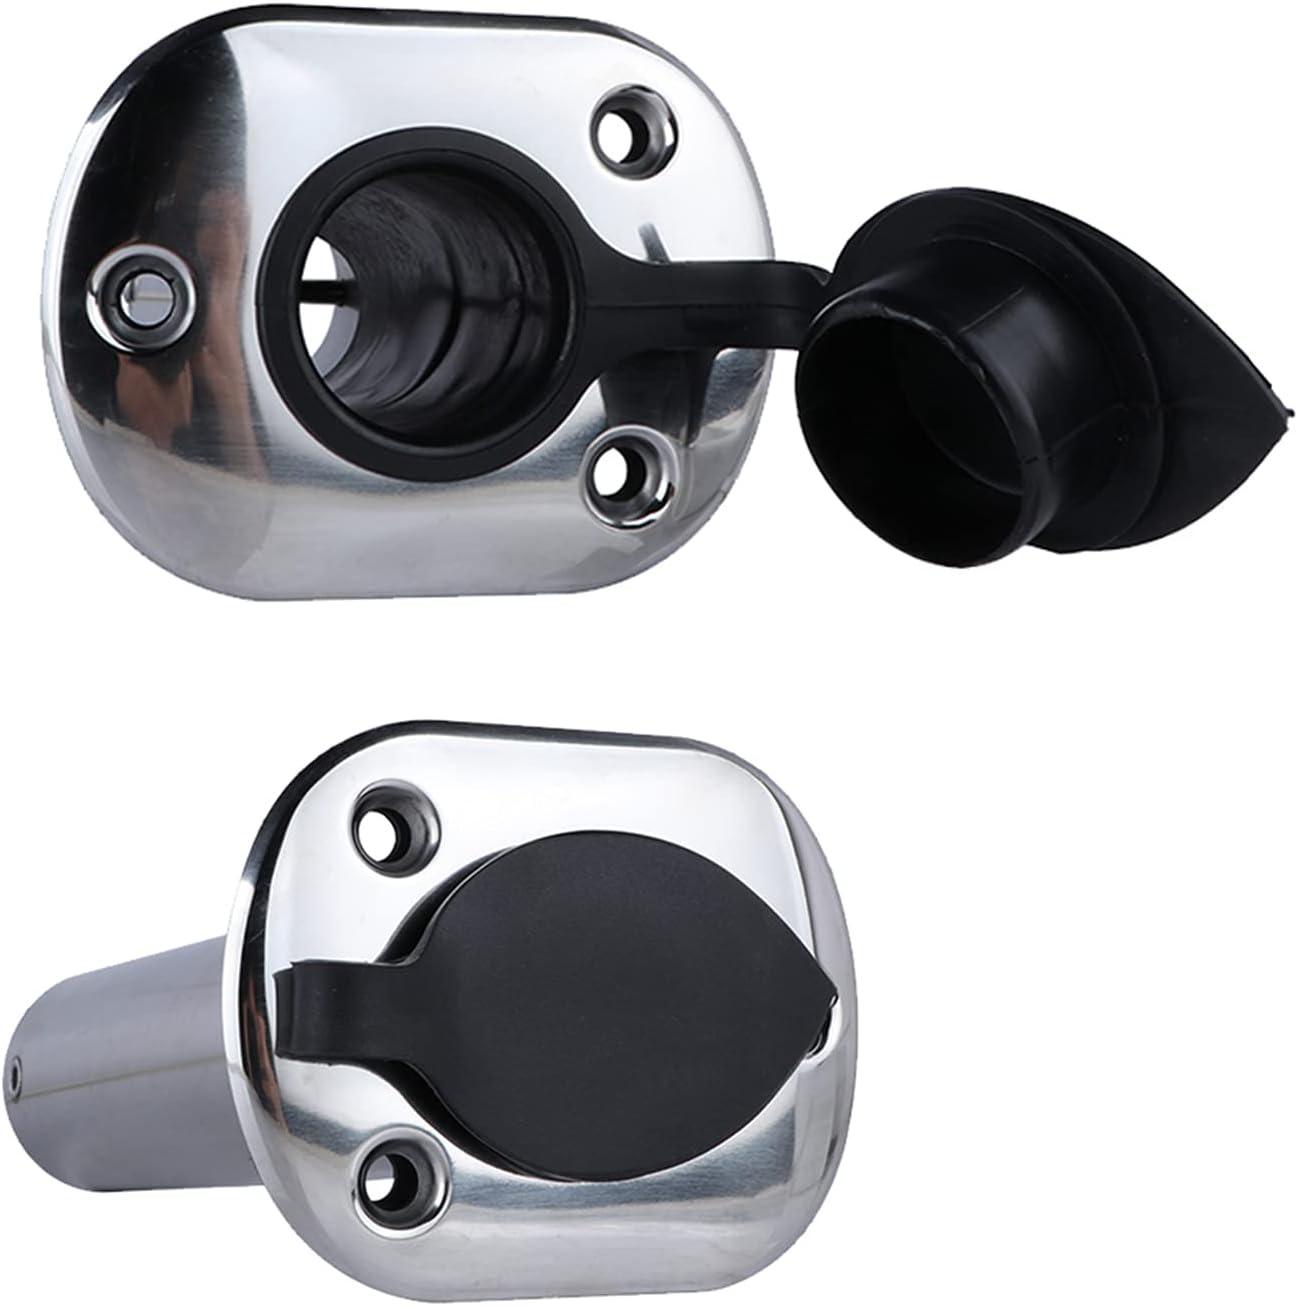  ISURE MARINE 2PCS Boat Stainless Steel Polished Fishing Rod  Holder Flush Mount 15 Degree Casting Flange with Rubber Cap, Liner, Gasket  PVC Cap and Inner Tube for Marine Yacht Kayak 